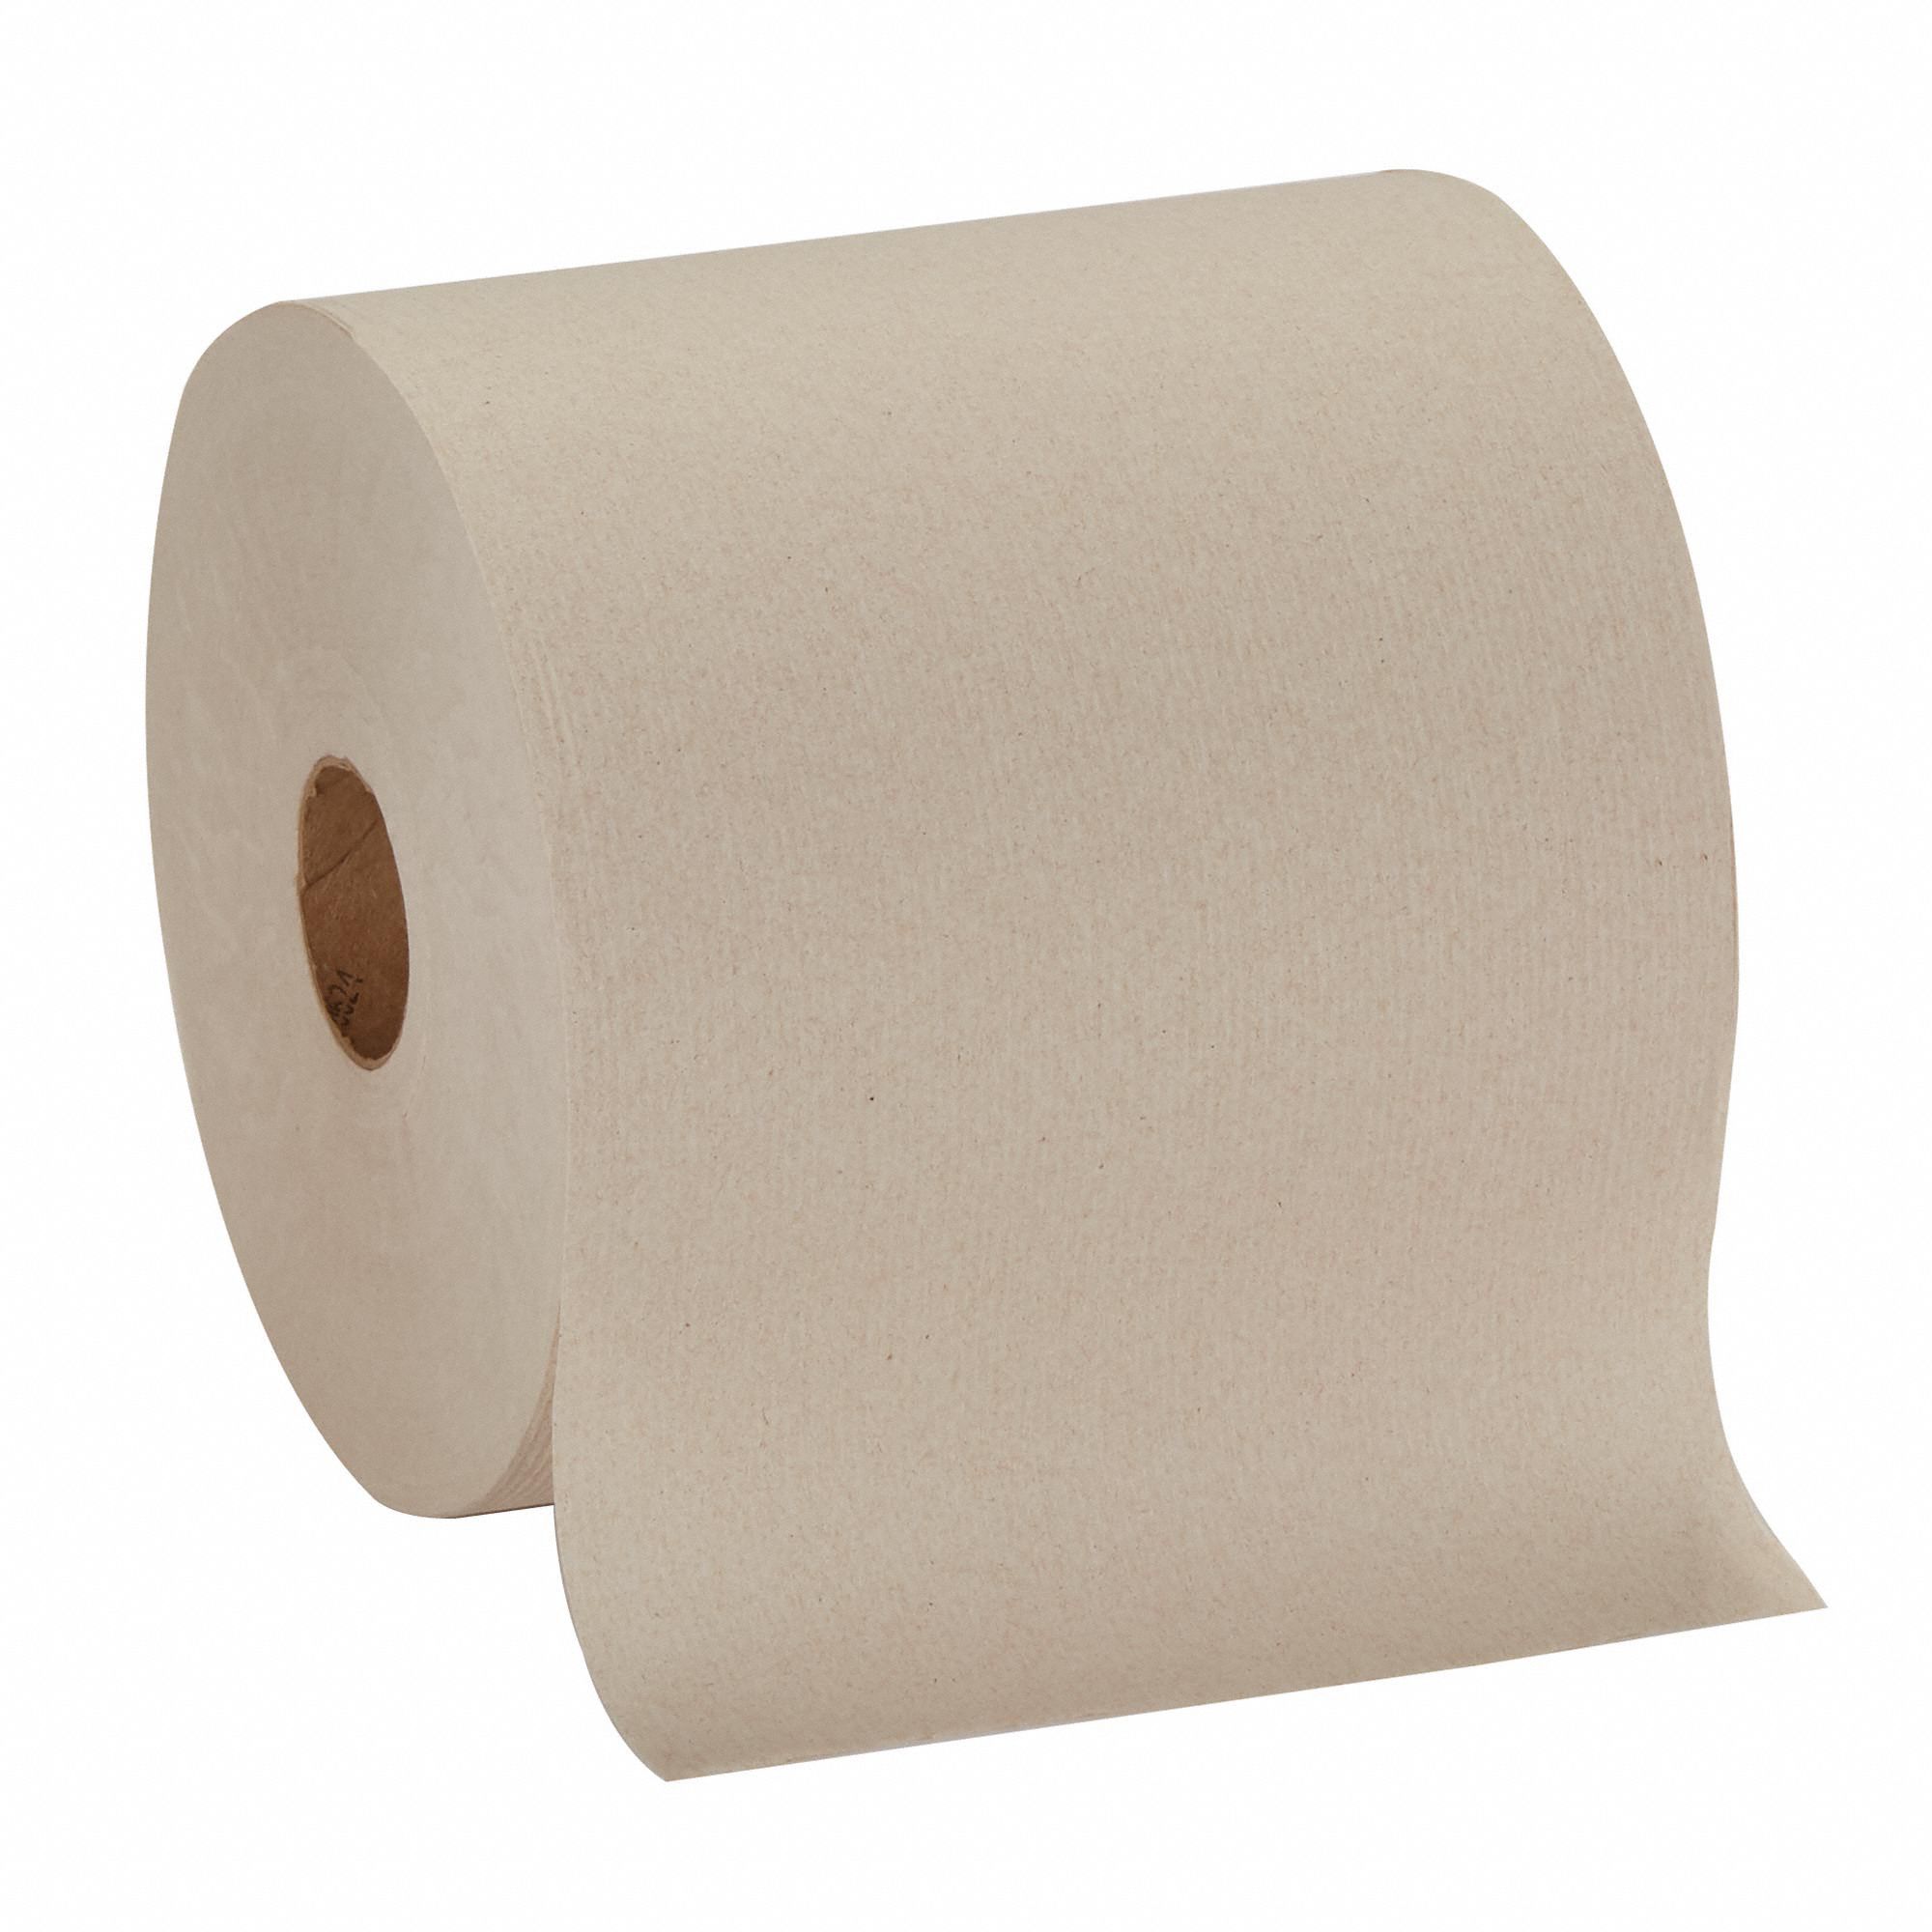 Paper Towel Roll: Brown, 7 3/4 in Roll Wd, 1,000 ft Roll Lg, 2 in Core Dia., 6 PK